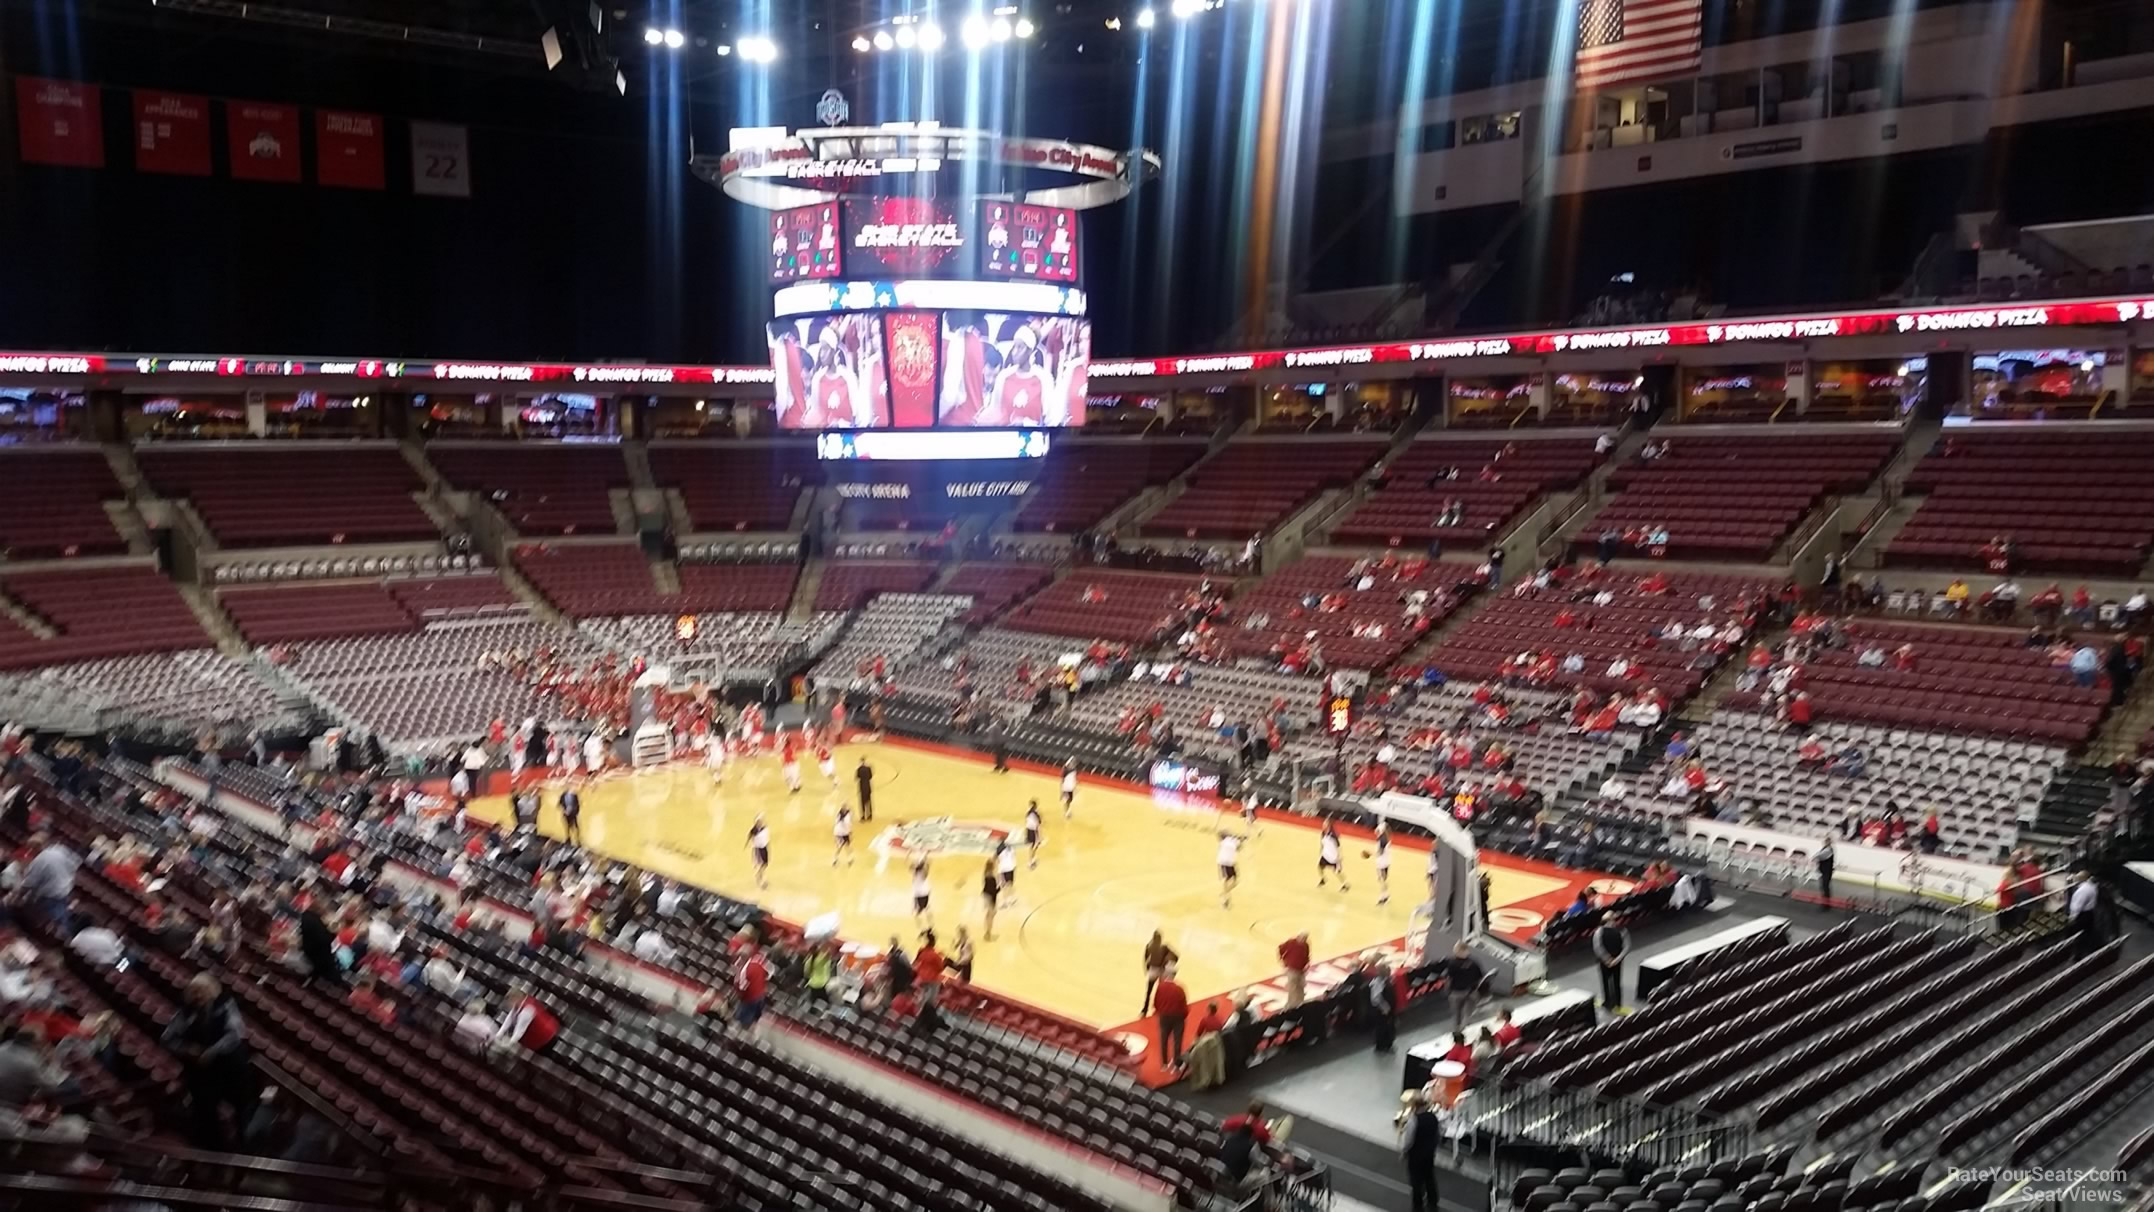 section 201, row h seat view  for basketball - schottenstein center